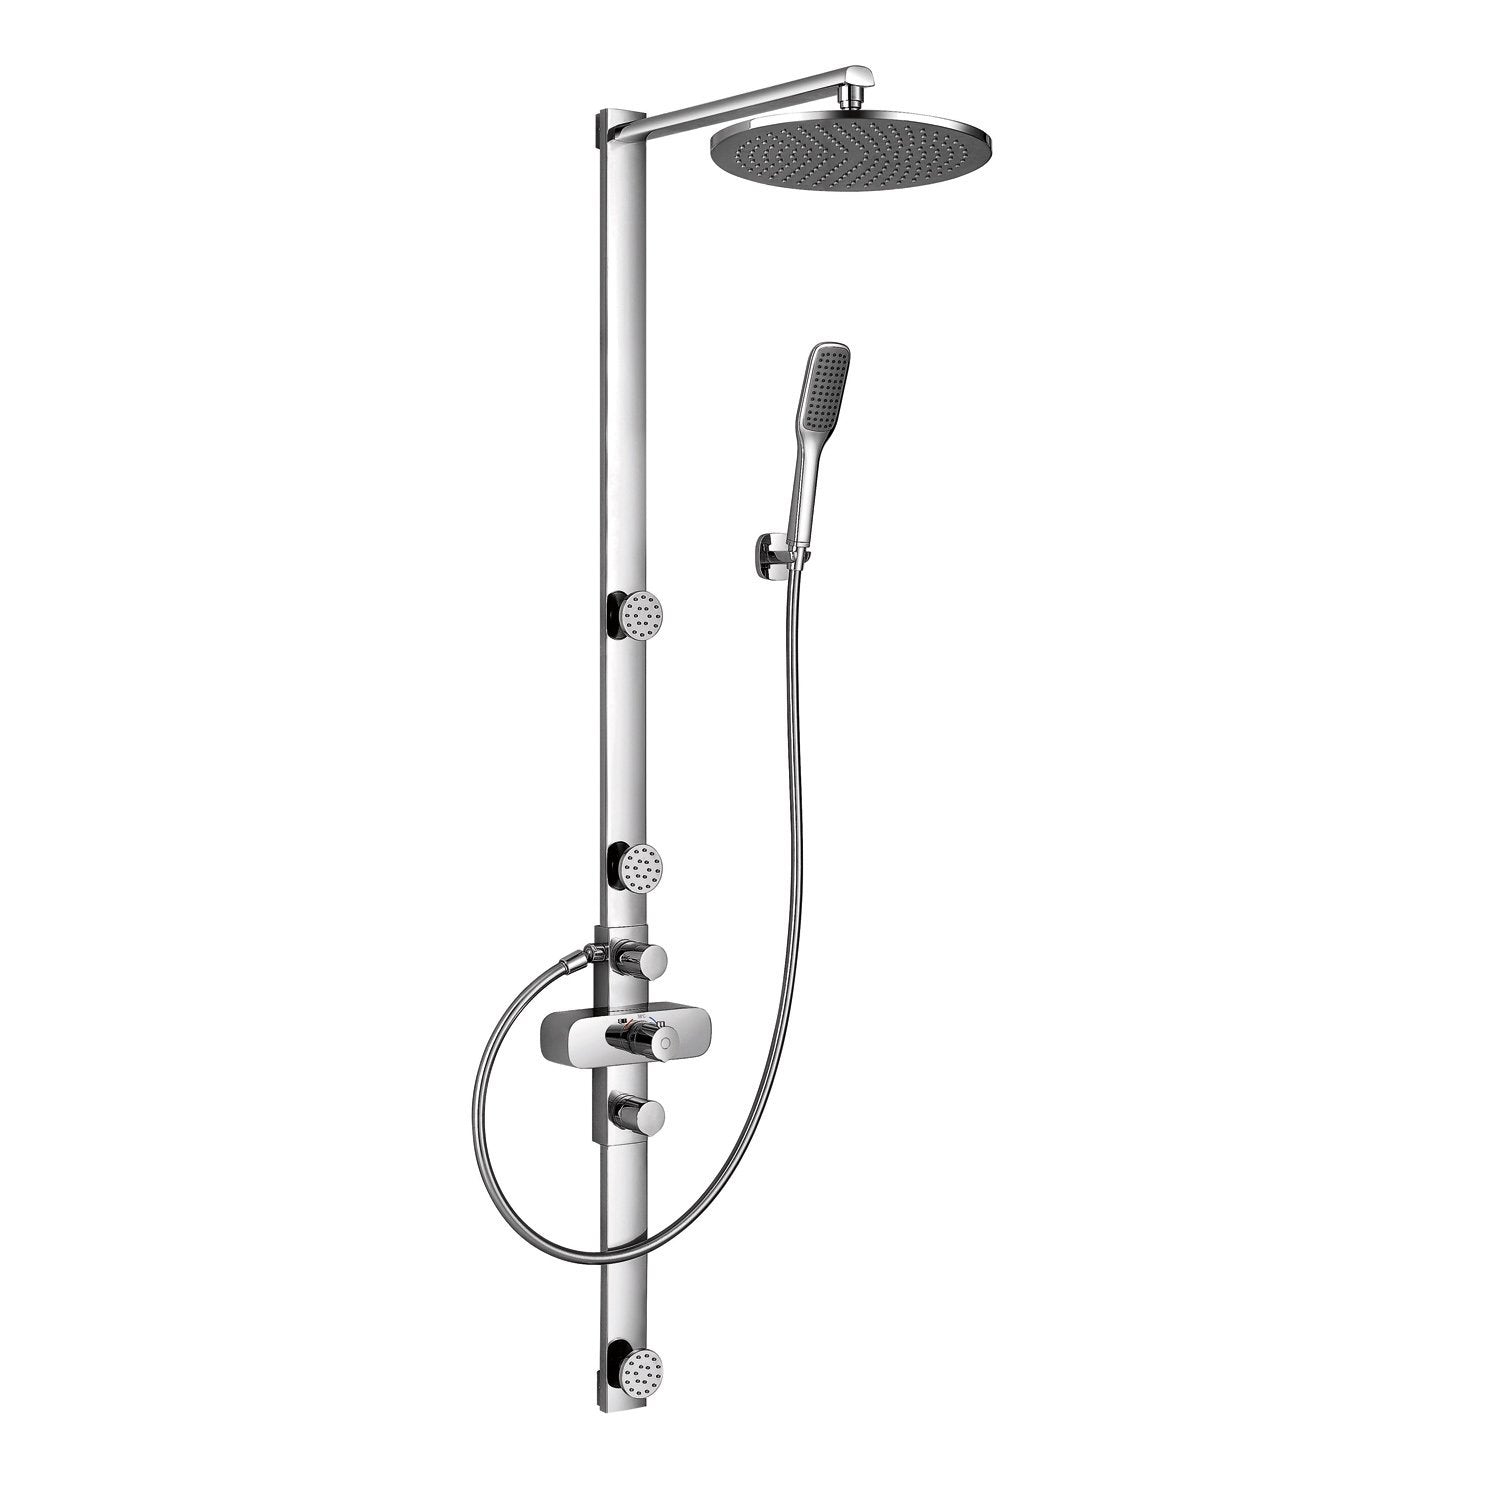 DAX Shower System with Round Rain Shower Head, 3 Nozzles, Hand Shower and Individual Controls, Wall Mount, Brass Body, Chrome Finish (DAX-FH8452-675)